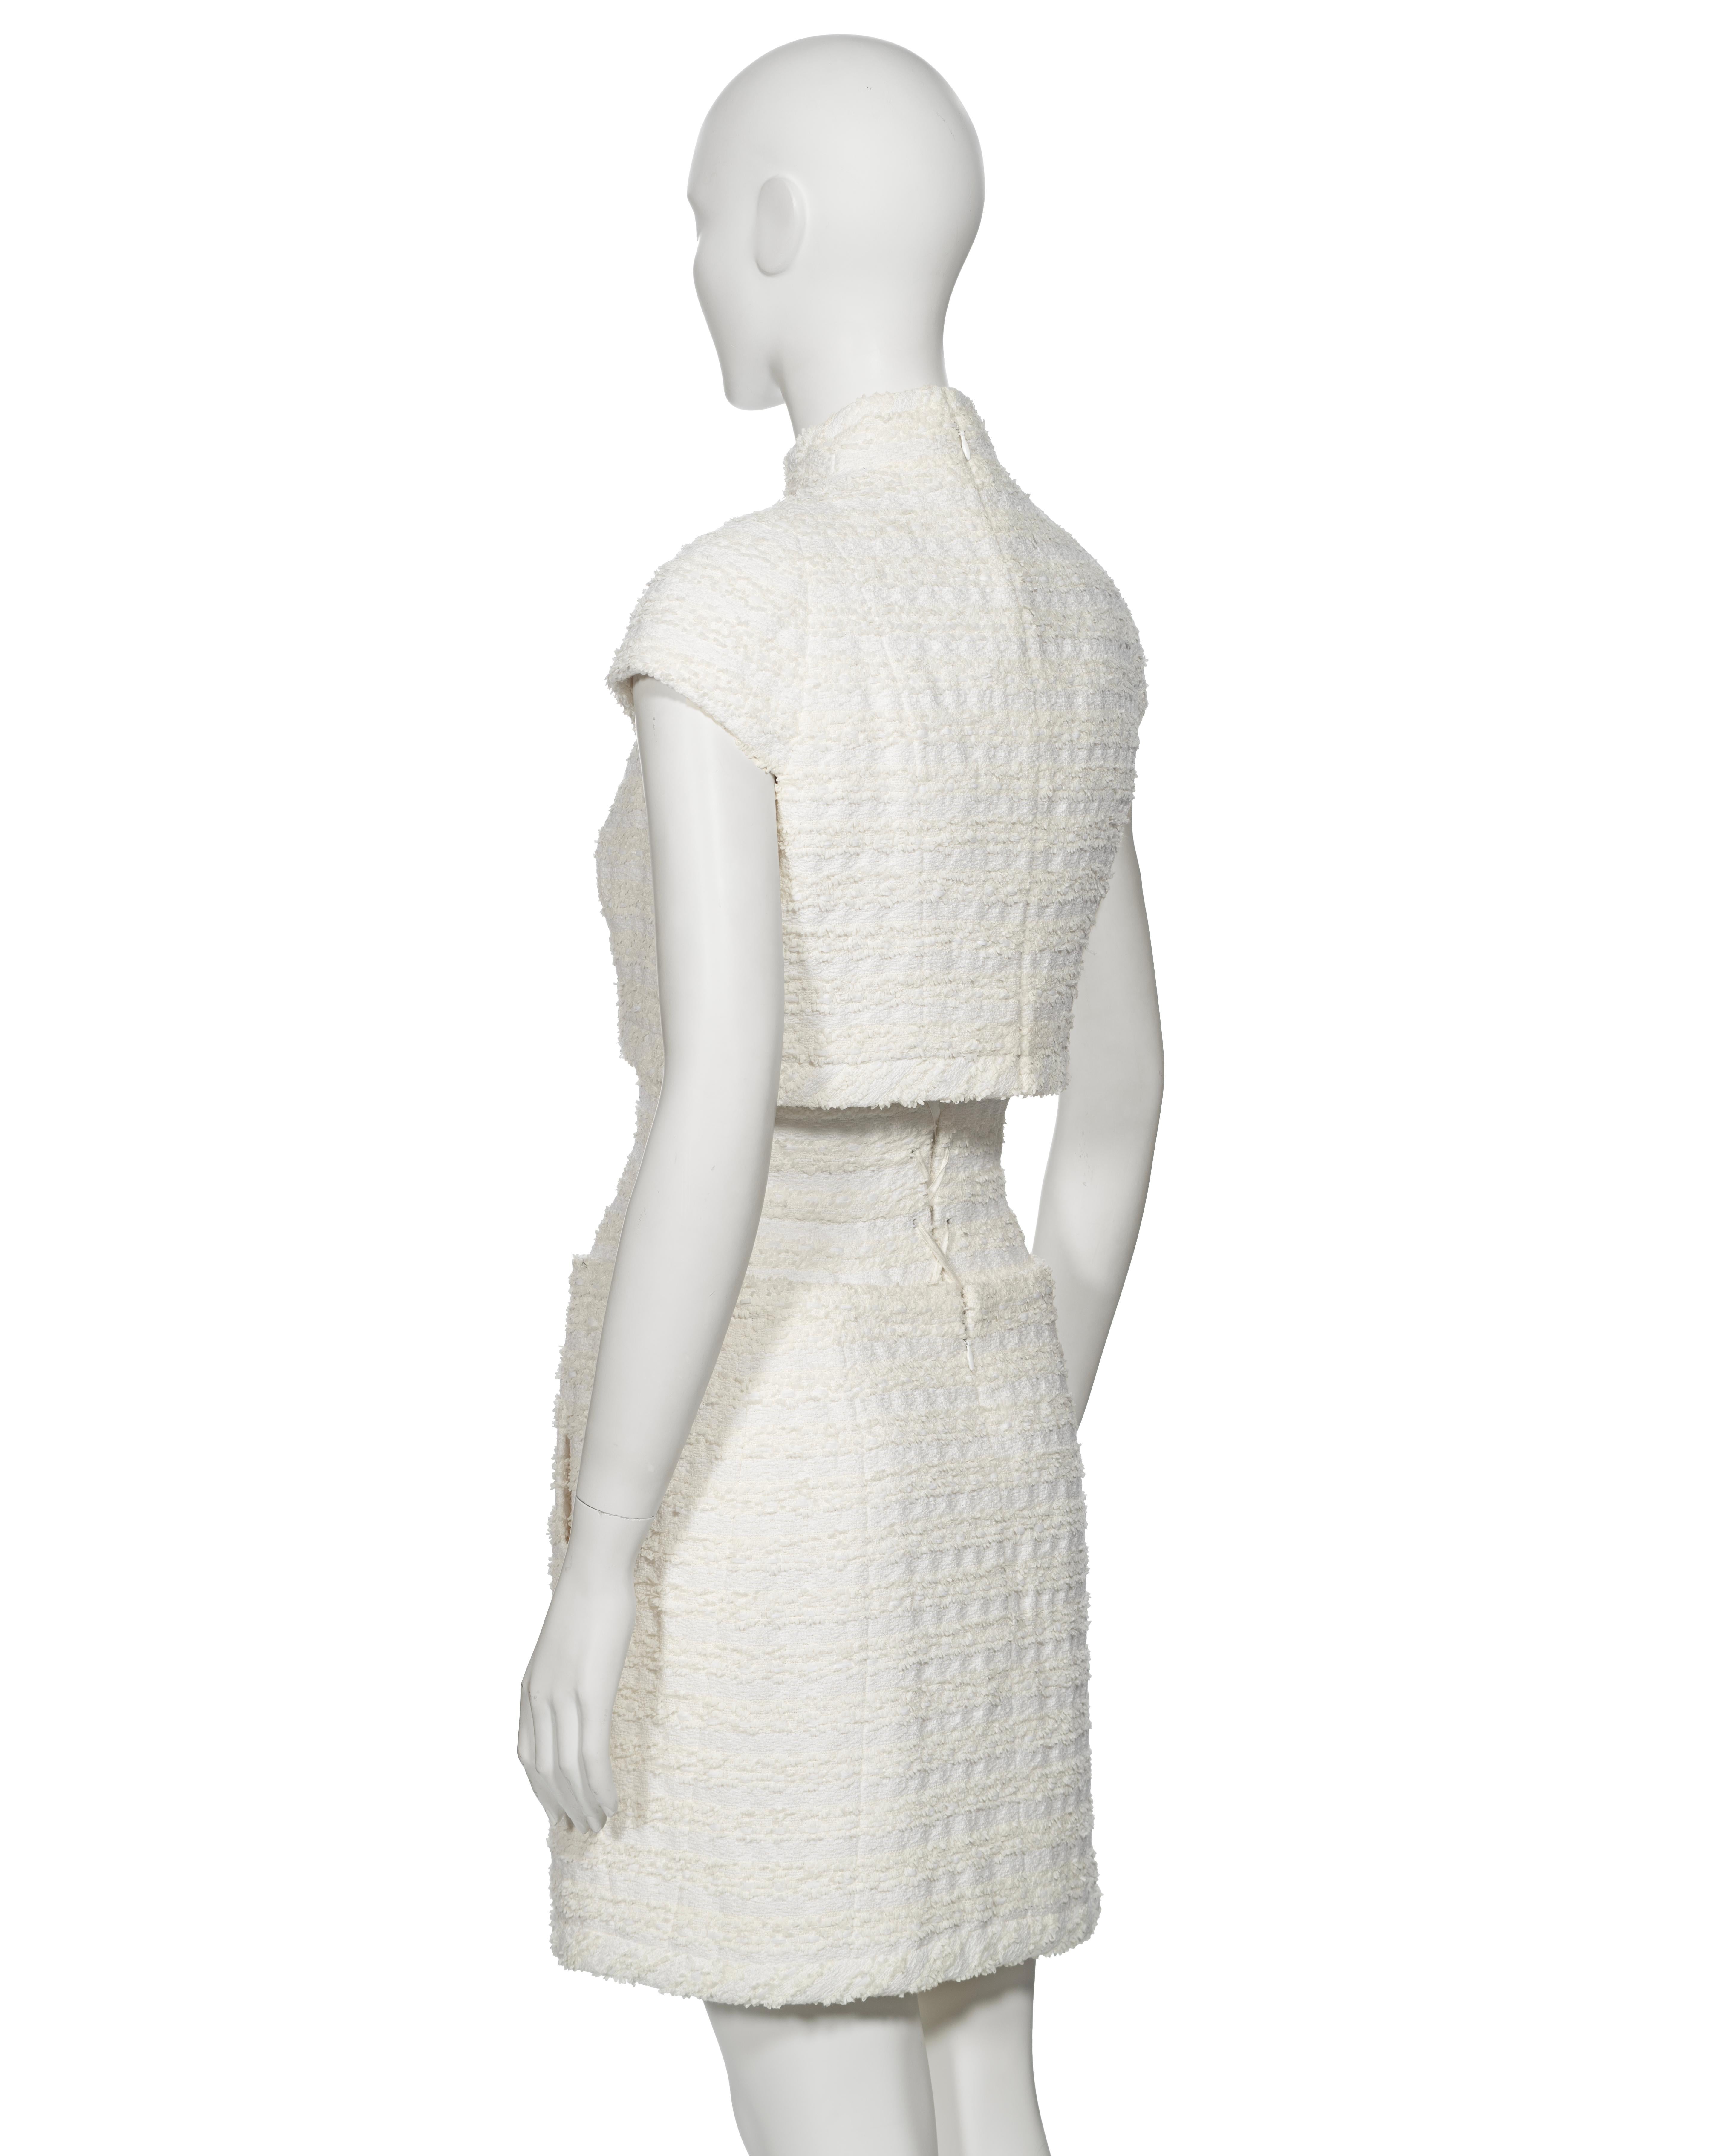 Chanel by Karl Lagerfeld Haute Couture White Bouclé Corseted Skirt Suit, ss 2014 For Sale 8